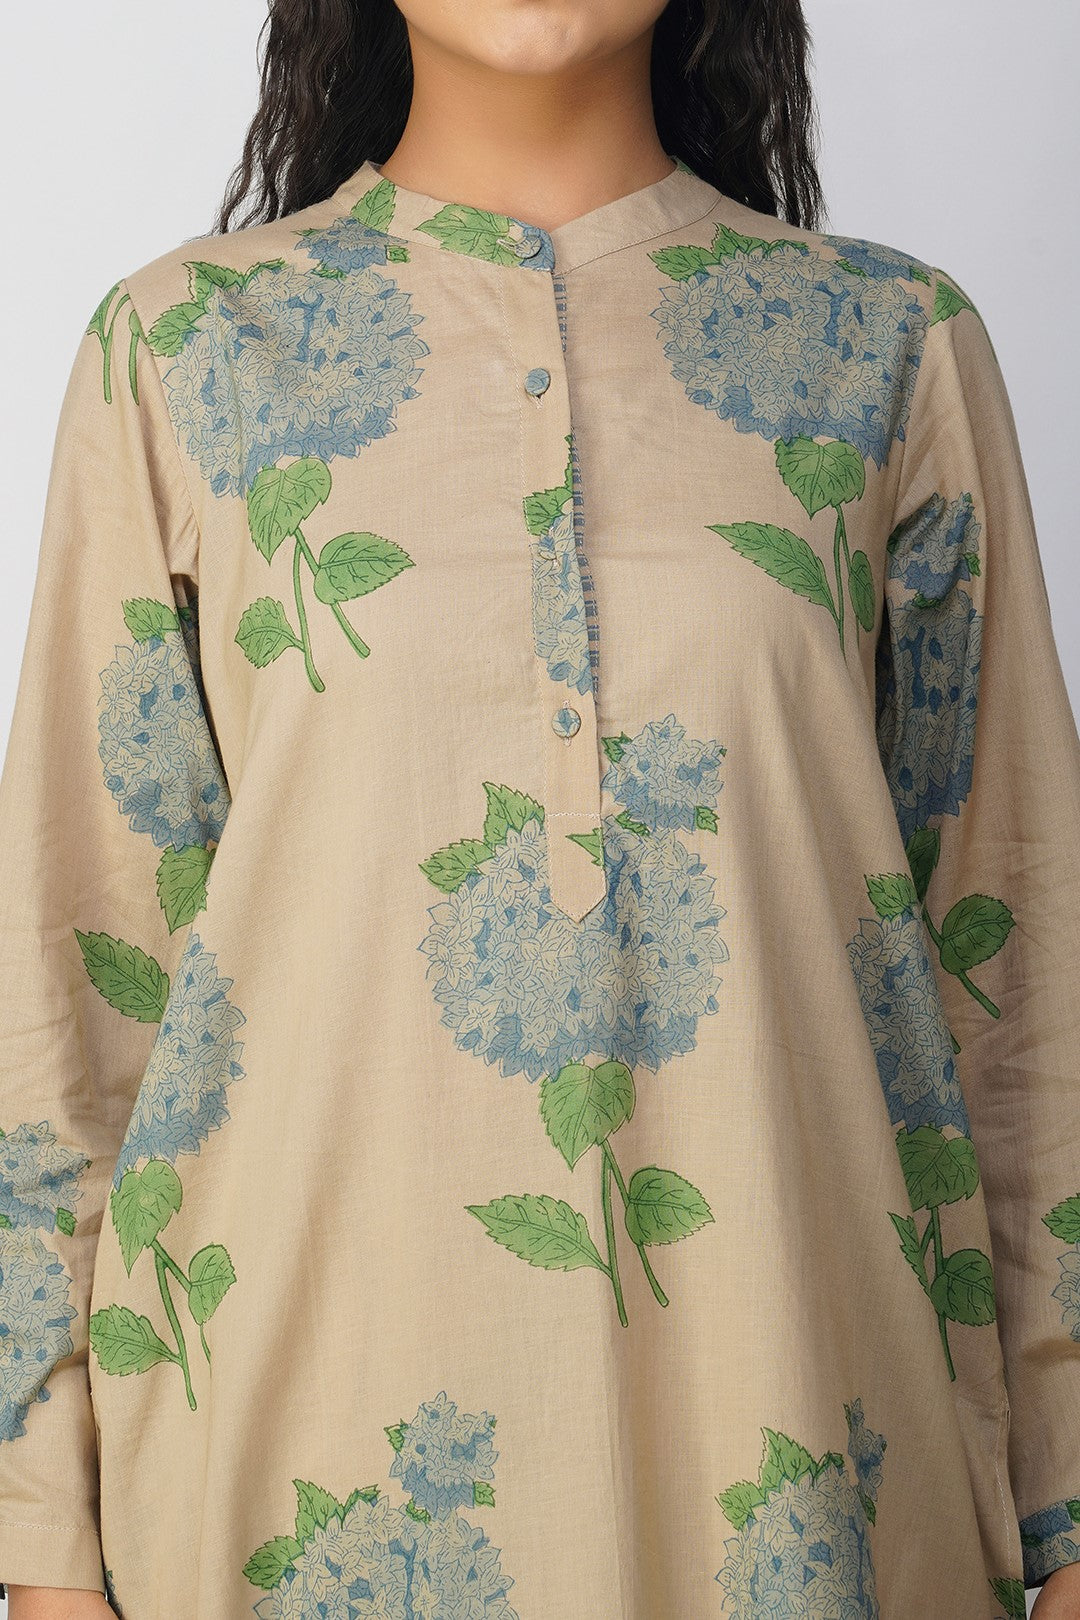 Blue Hydrangea Block Printed Tunic With Floral Pants